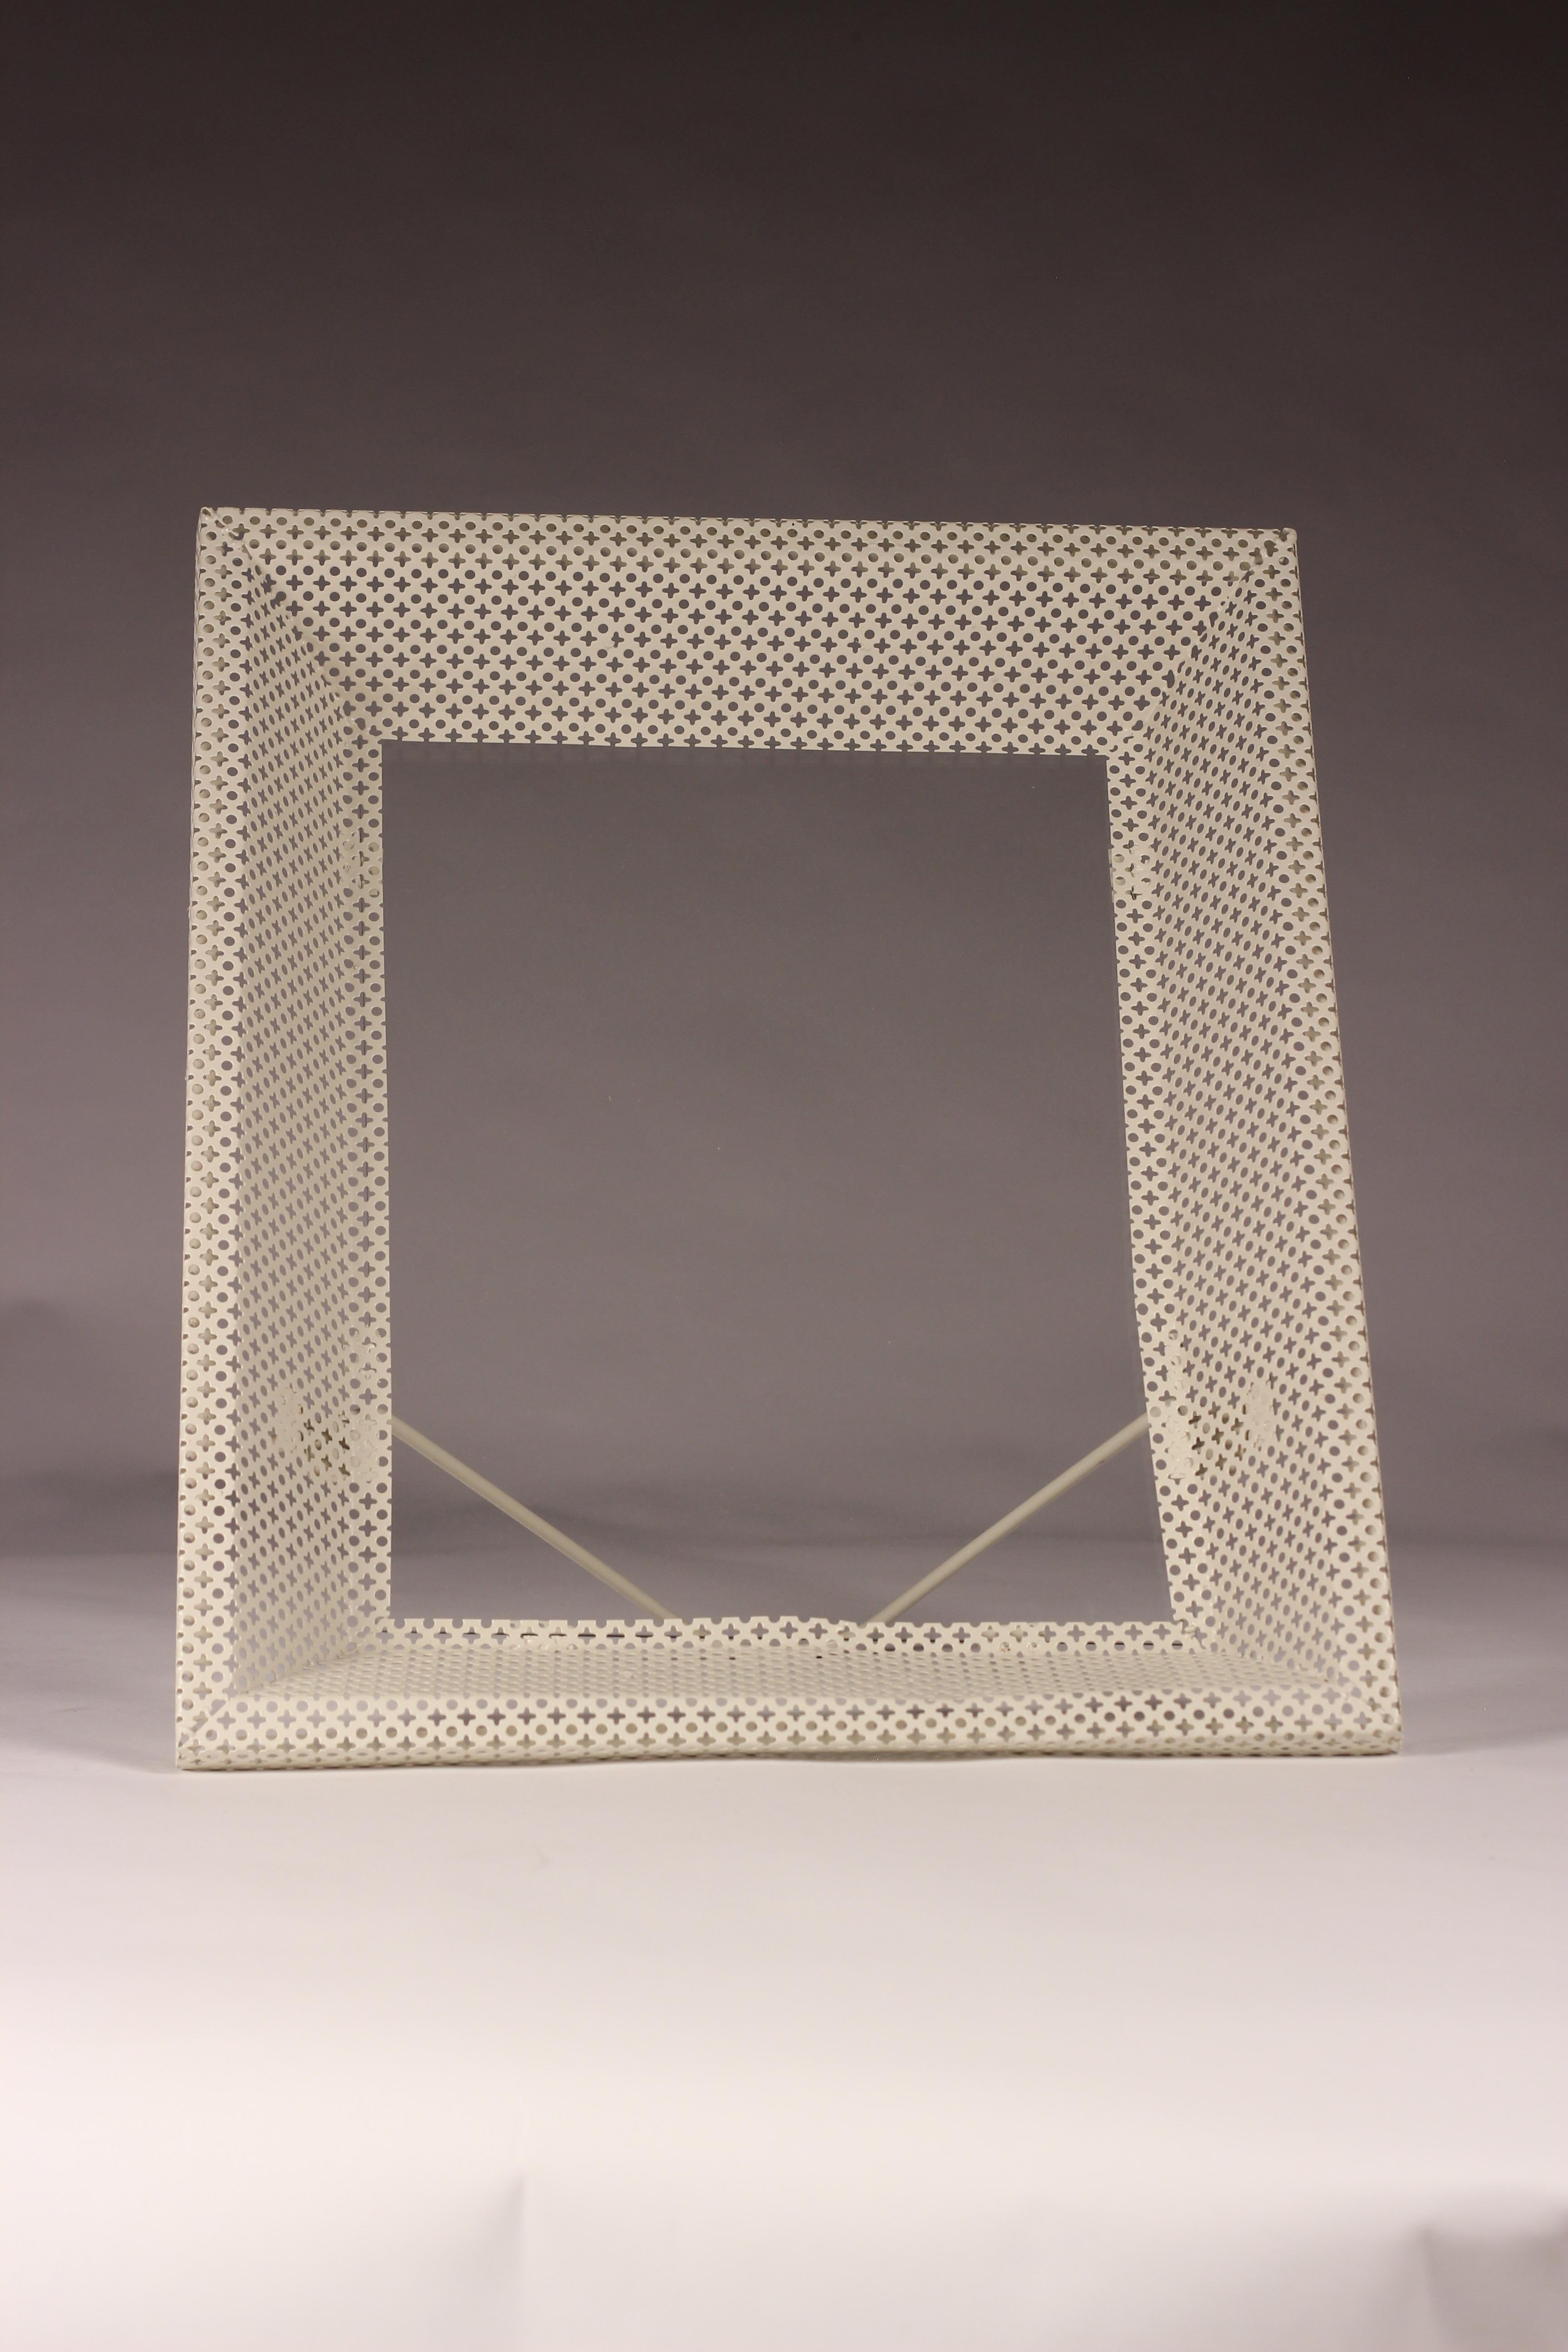 Pair of Mathieu Matégot White Perforated Metal Picture Frames/Mirrors 3